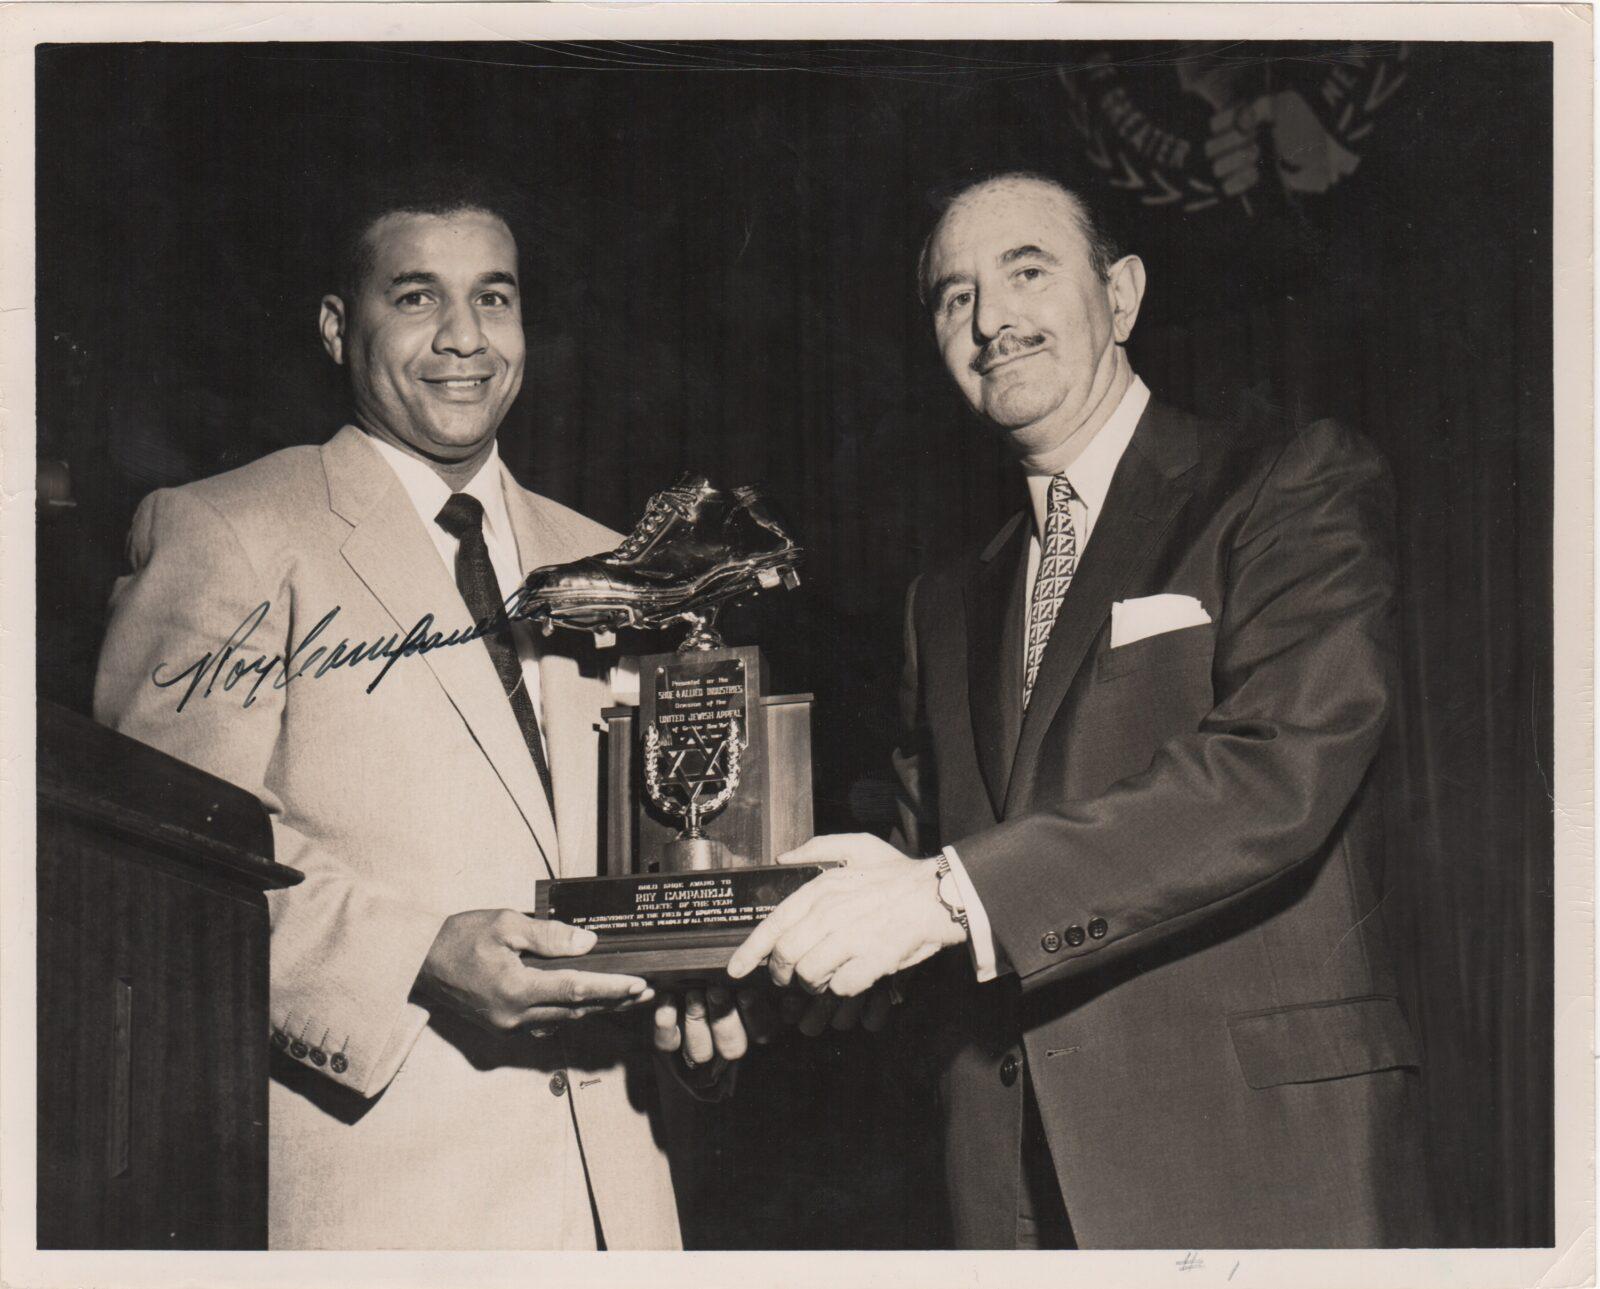 For baseball icon and Philly native Roy Campanella, fame the world